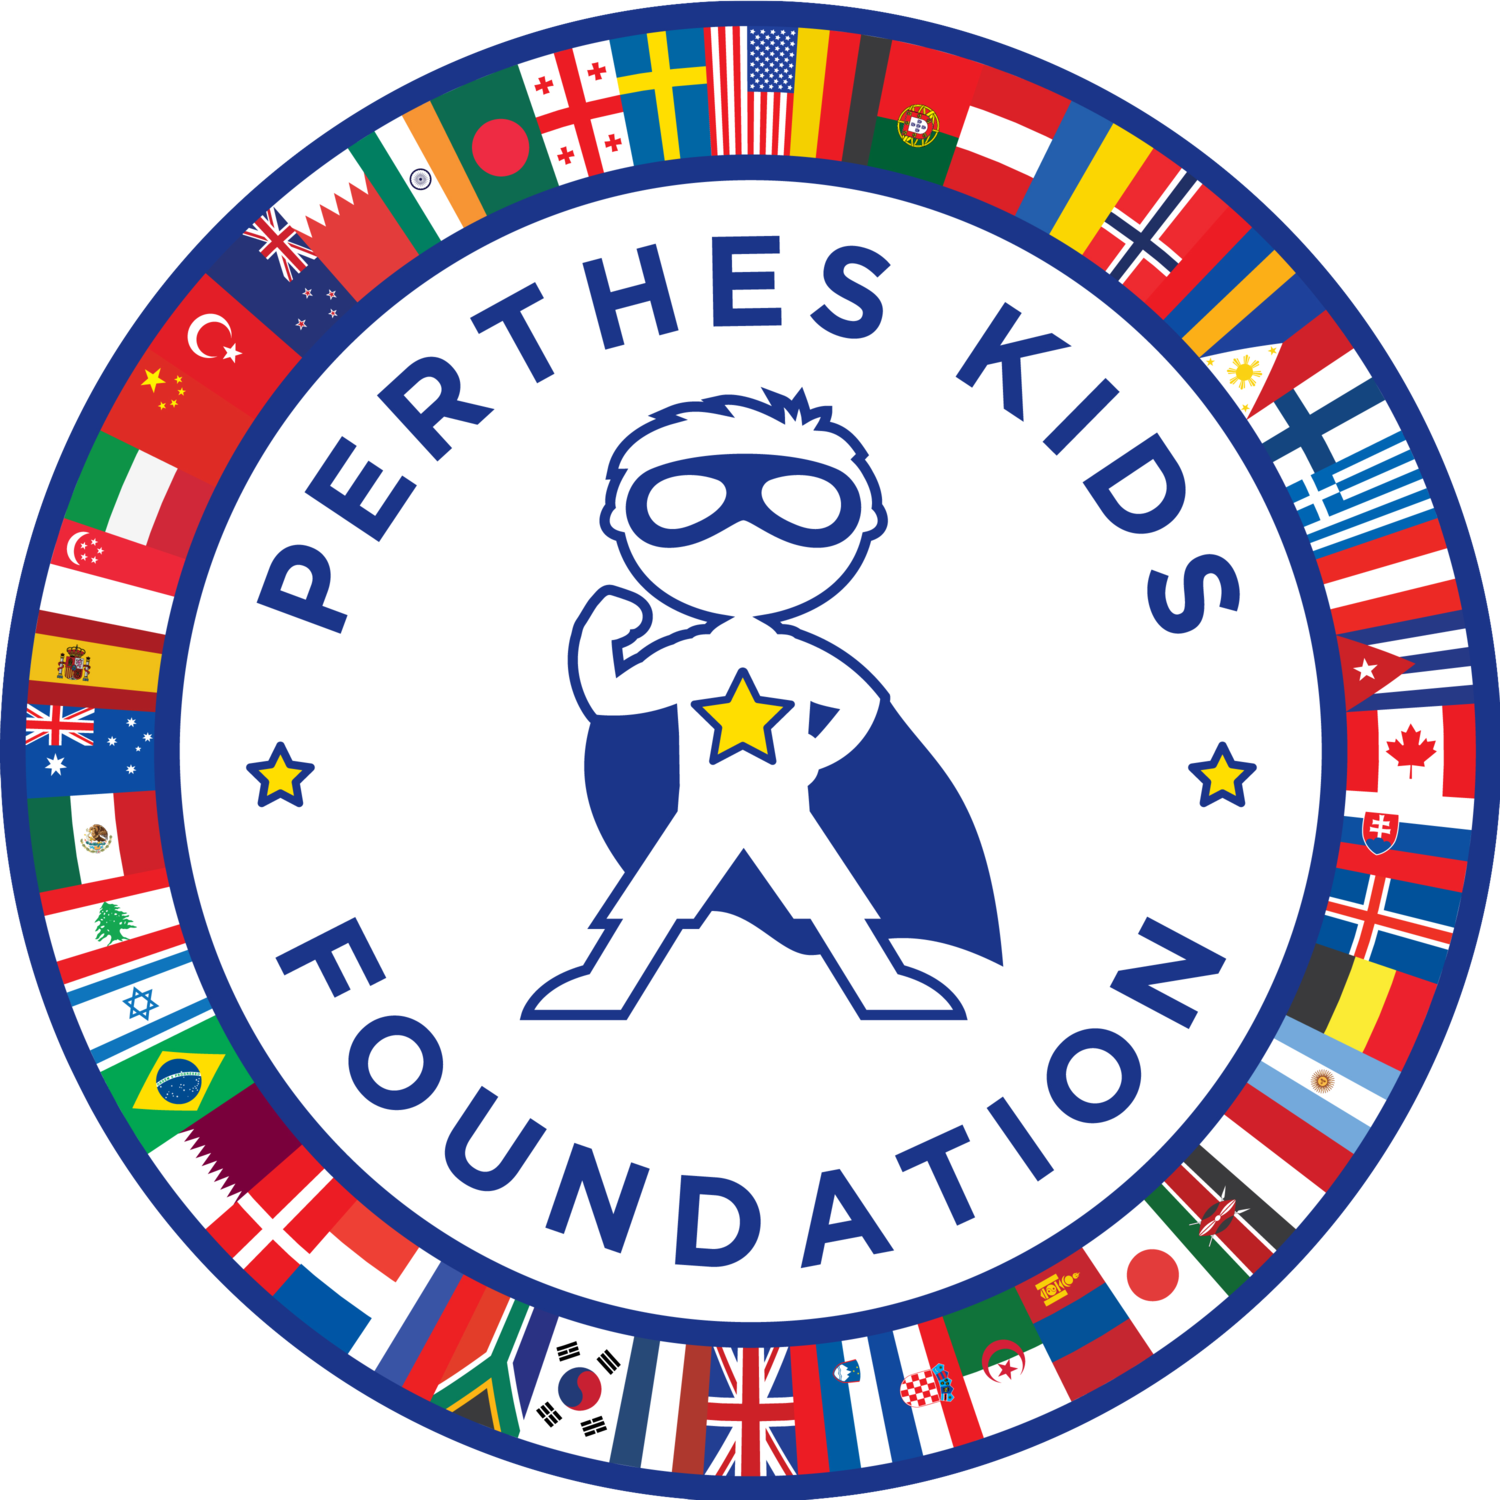 Perthes Kids Foundation